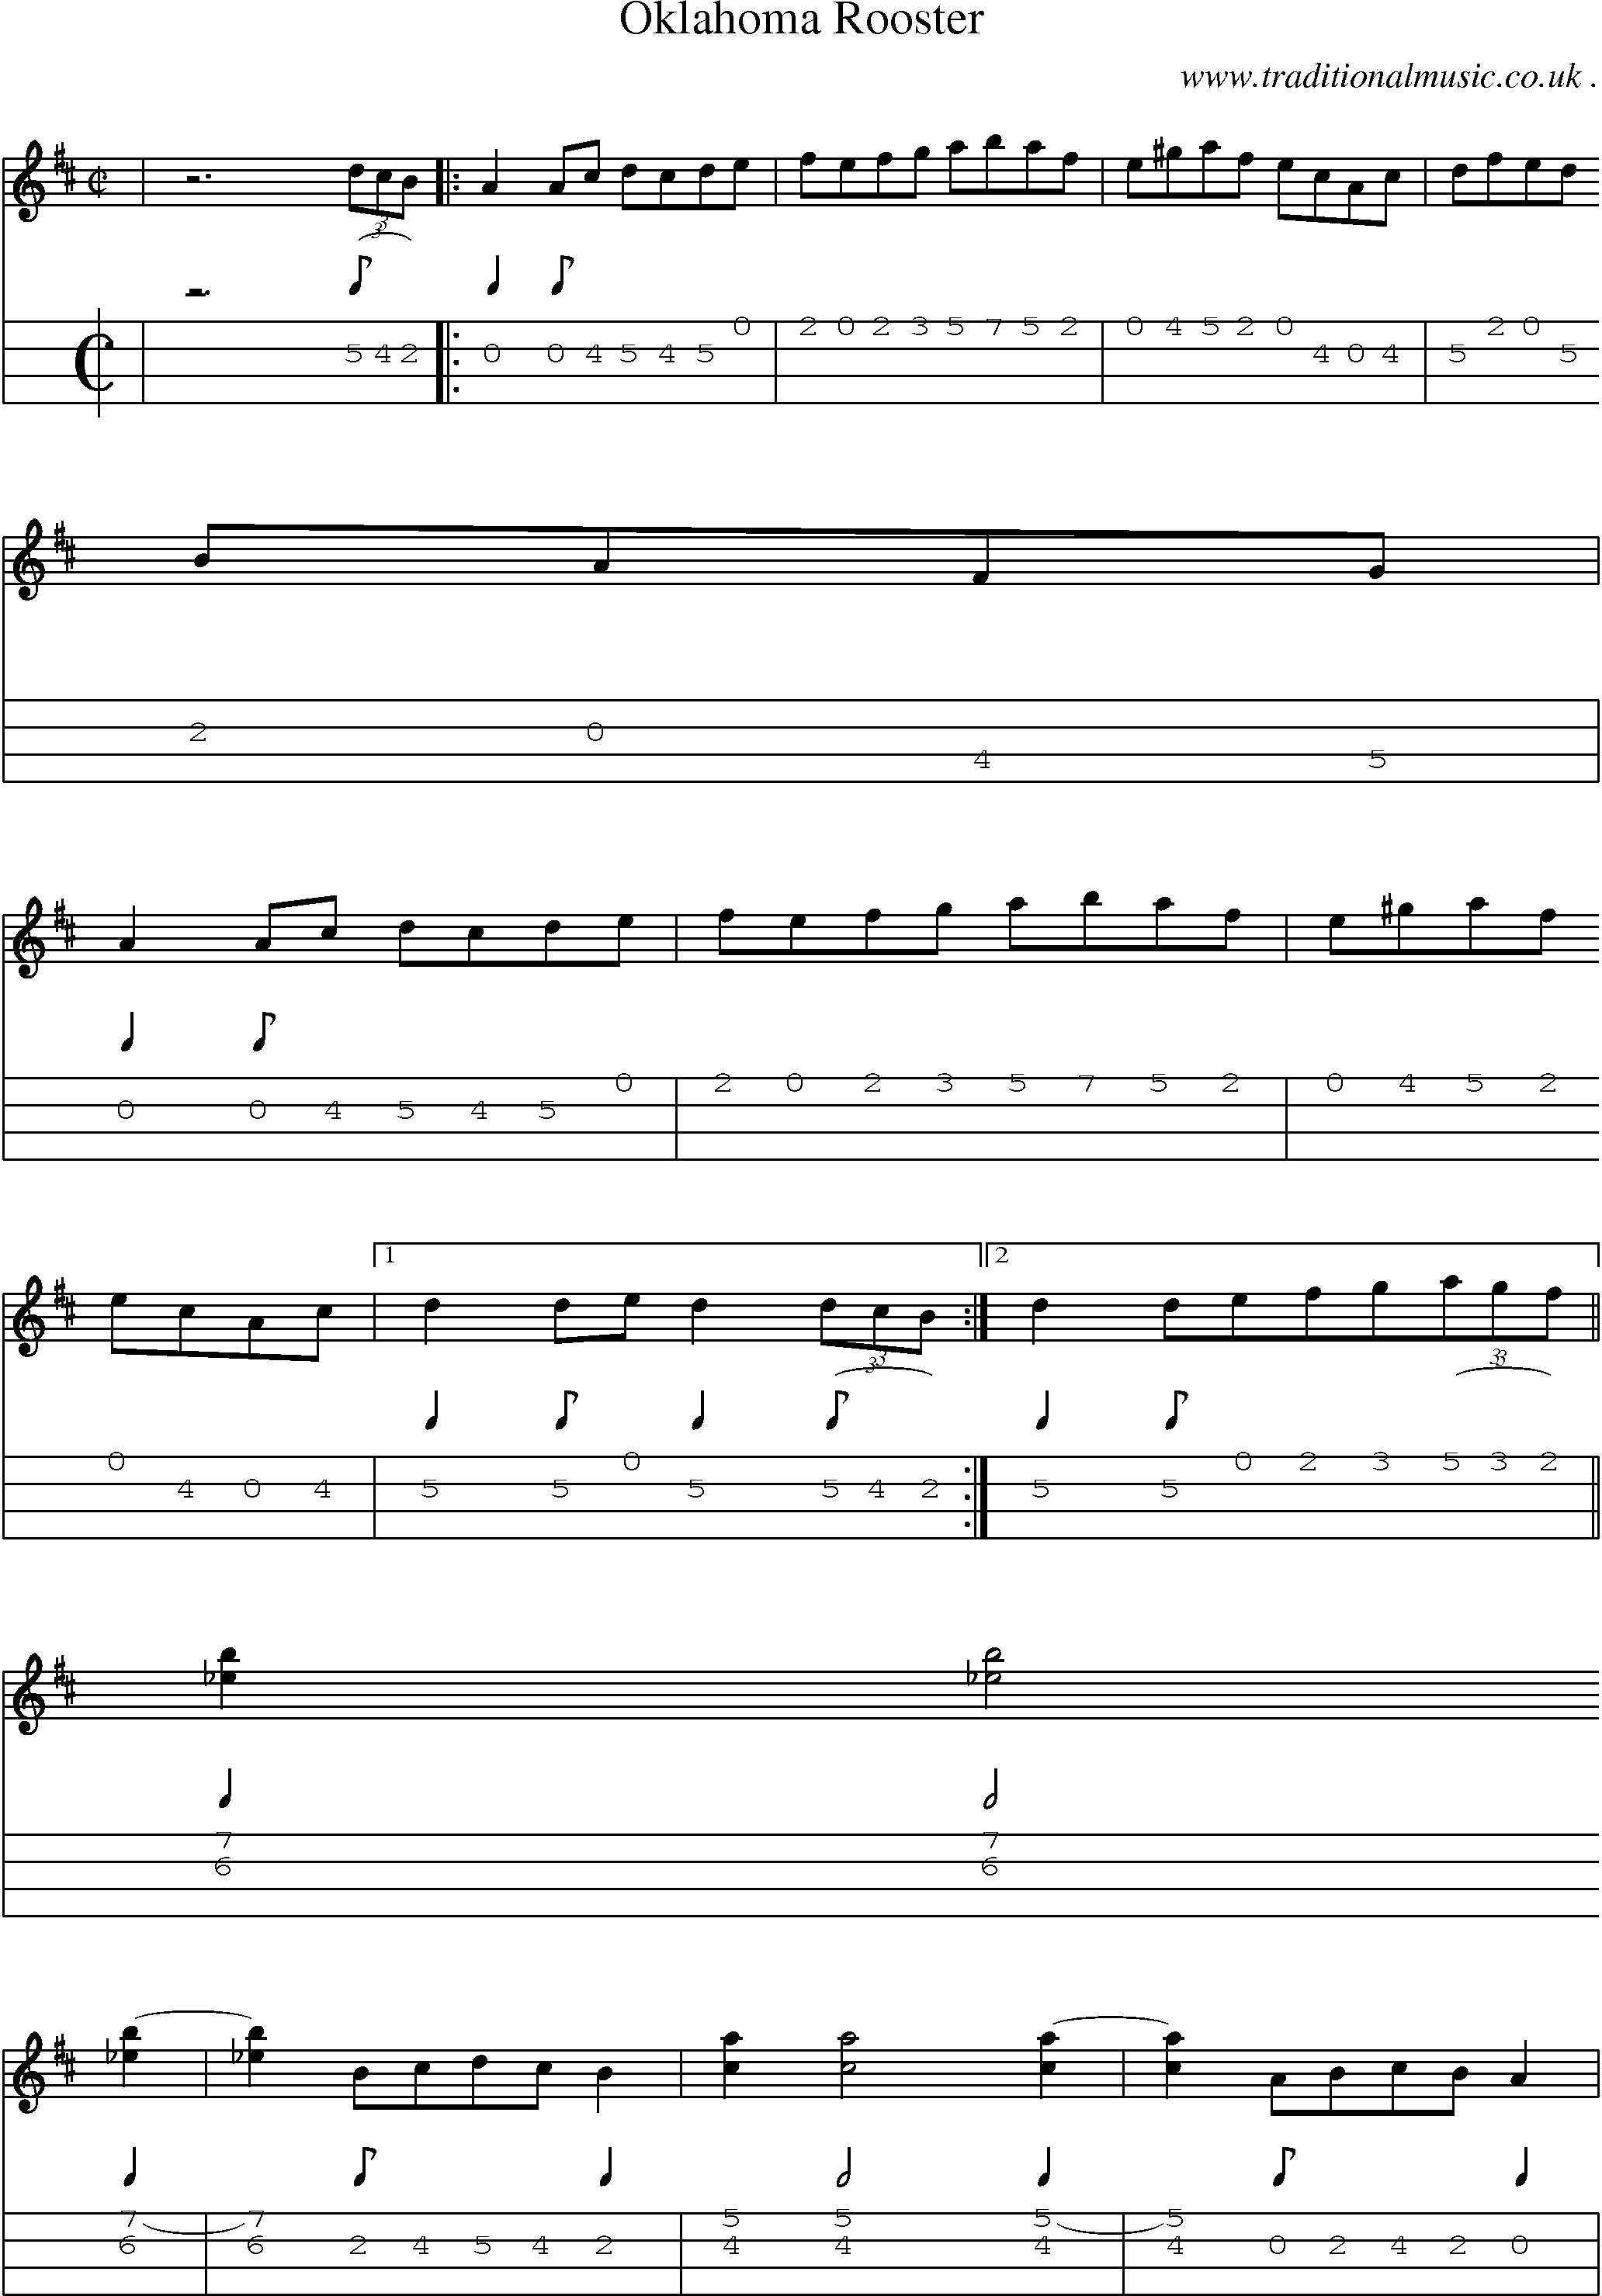 Music Score and Guitar Tabs for Oklahoma Rooster